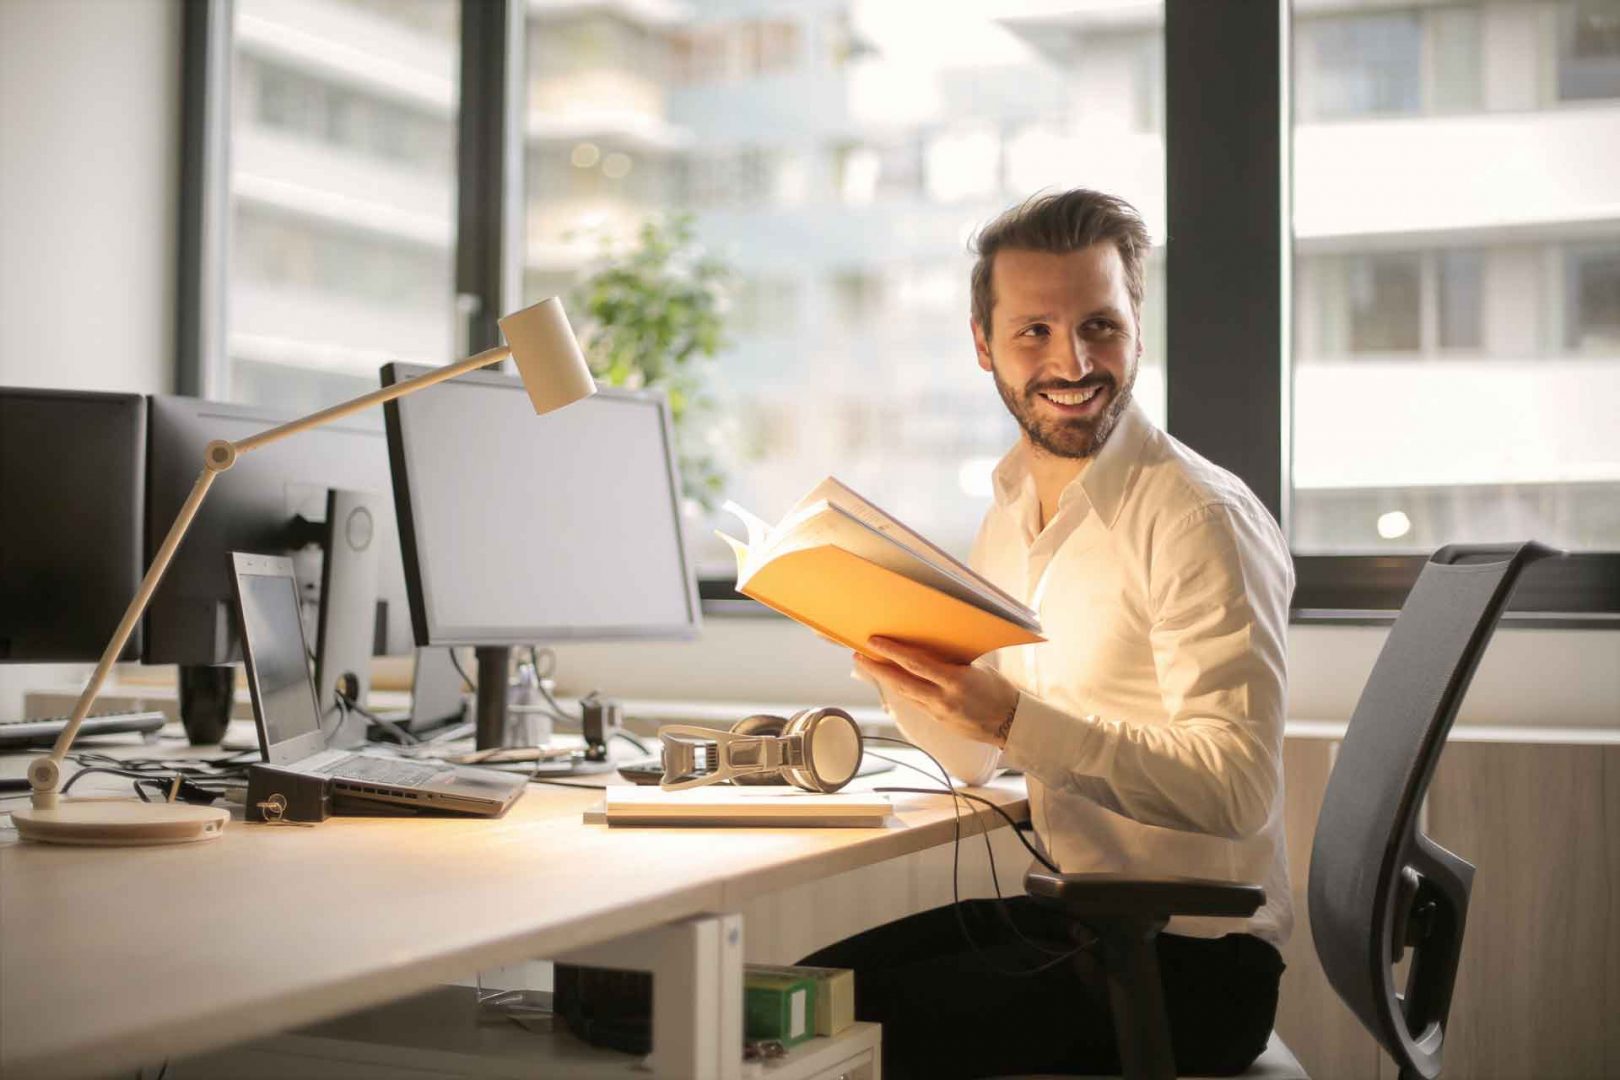 Smiling man sitting at computer desk while reading a book